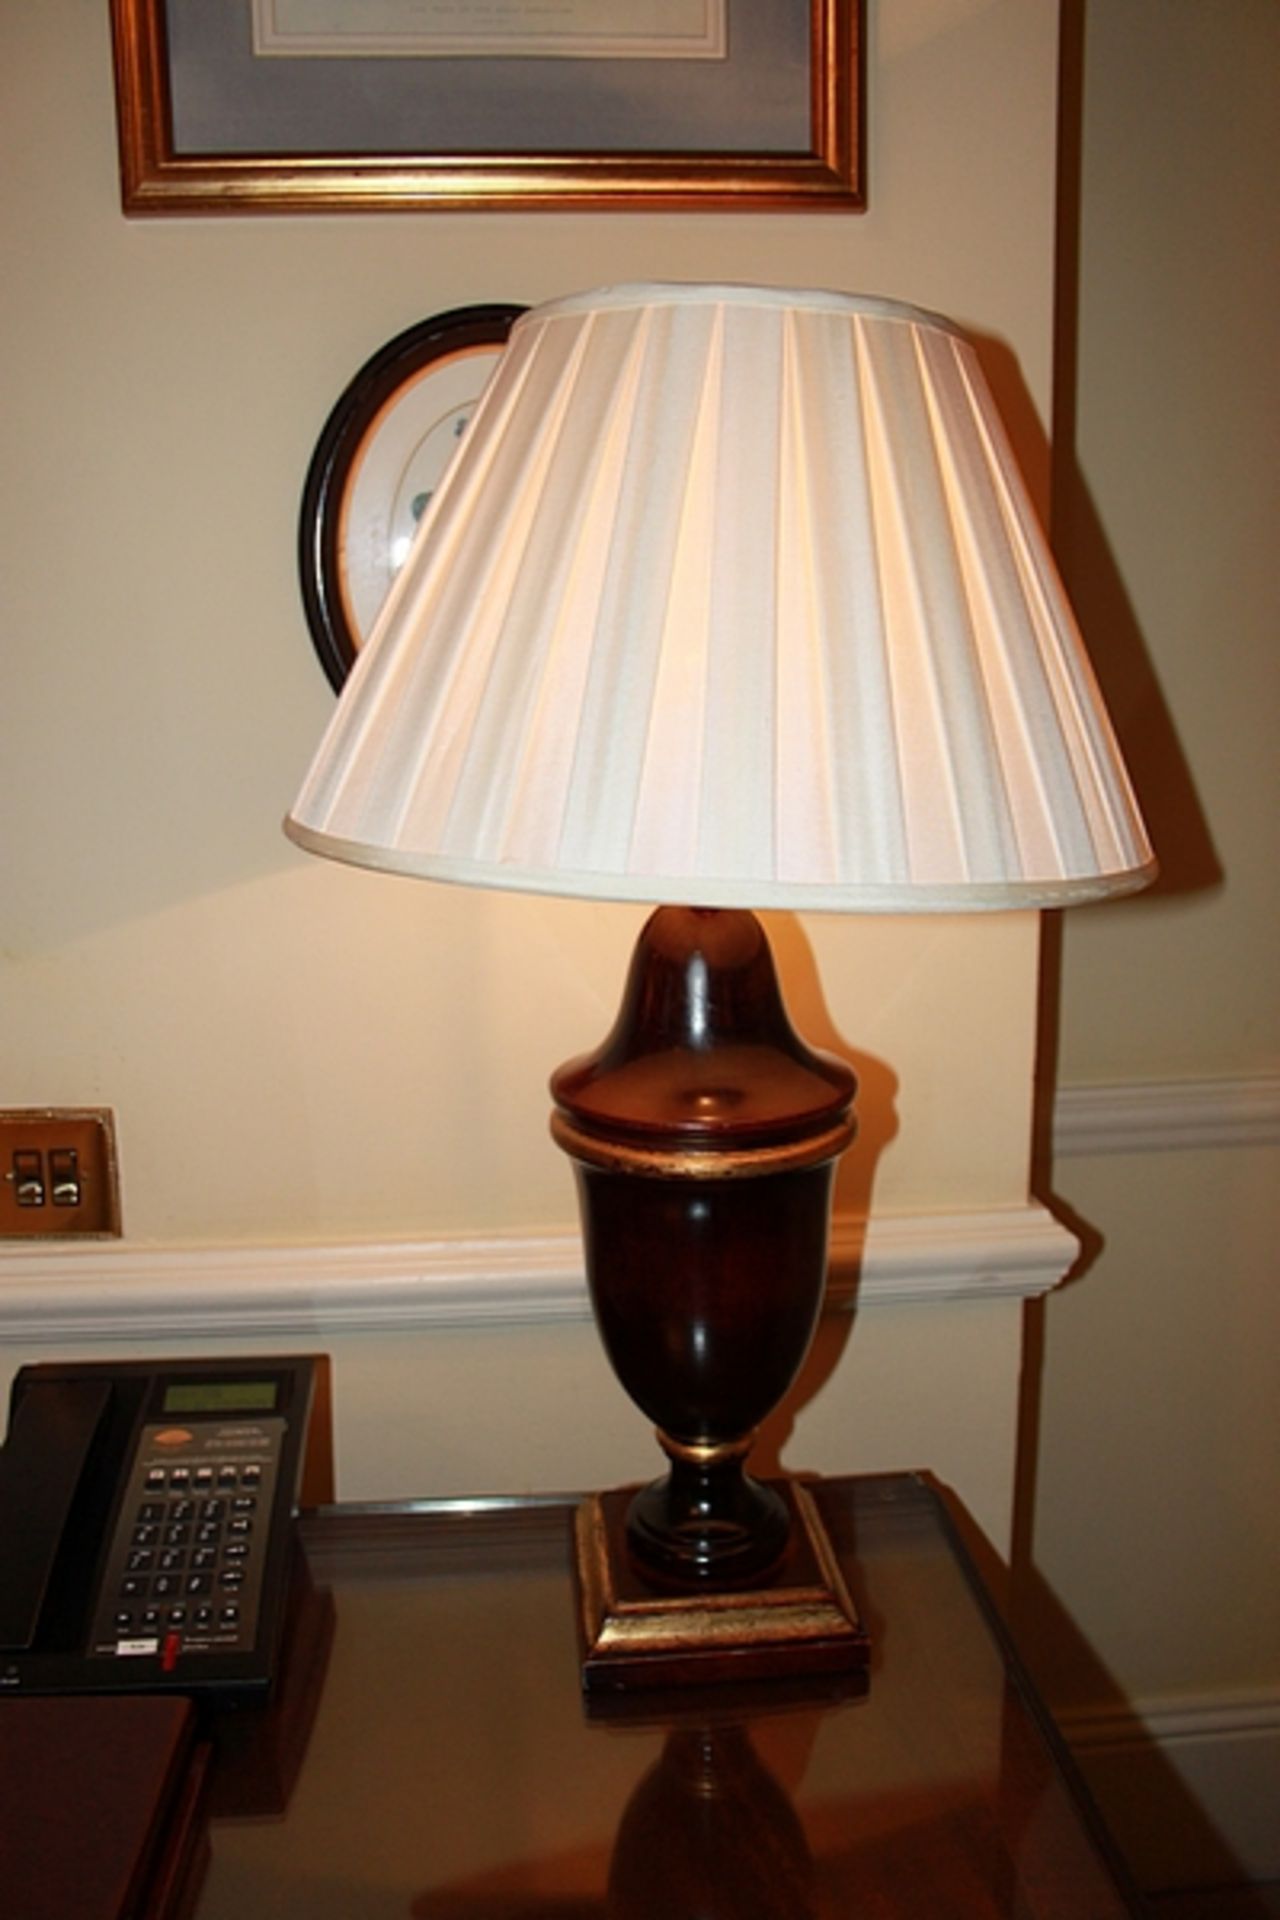 3 x lamps - 2 x large urn shaped lamps and a metal column style lamp - Image 2 of 2